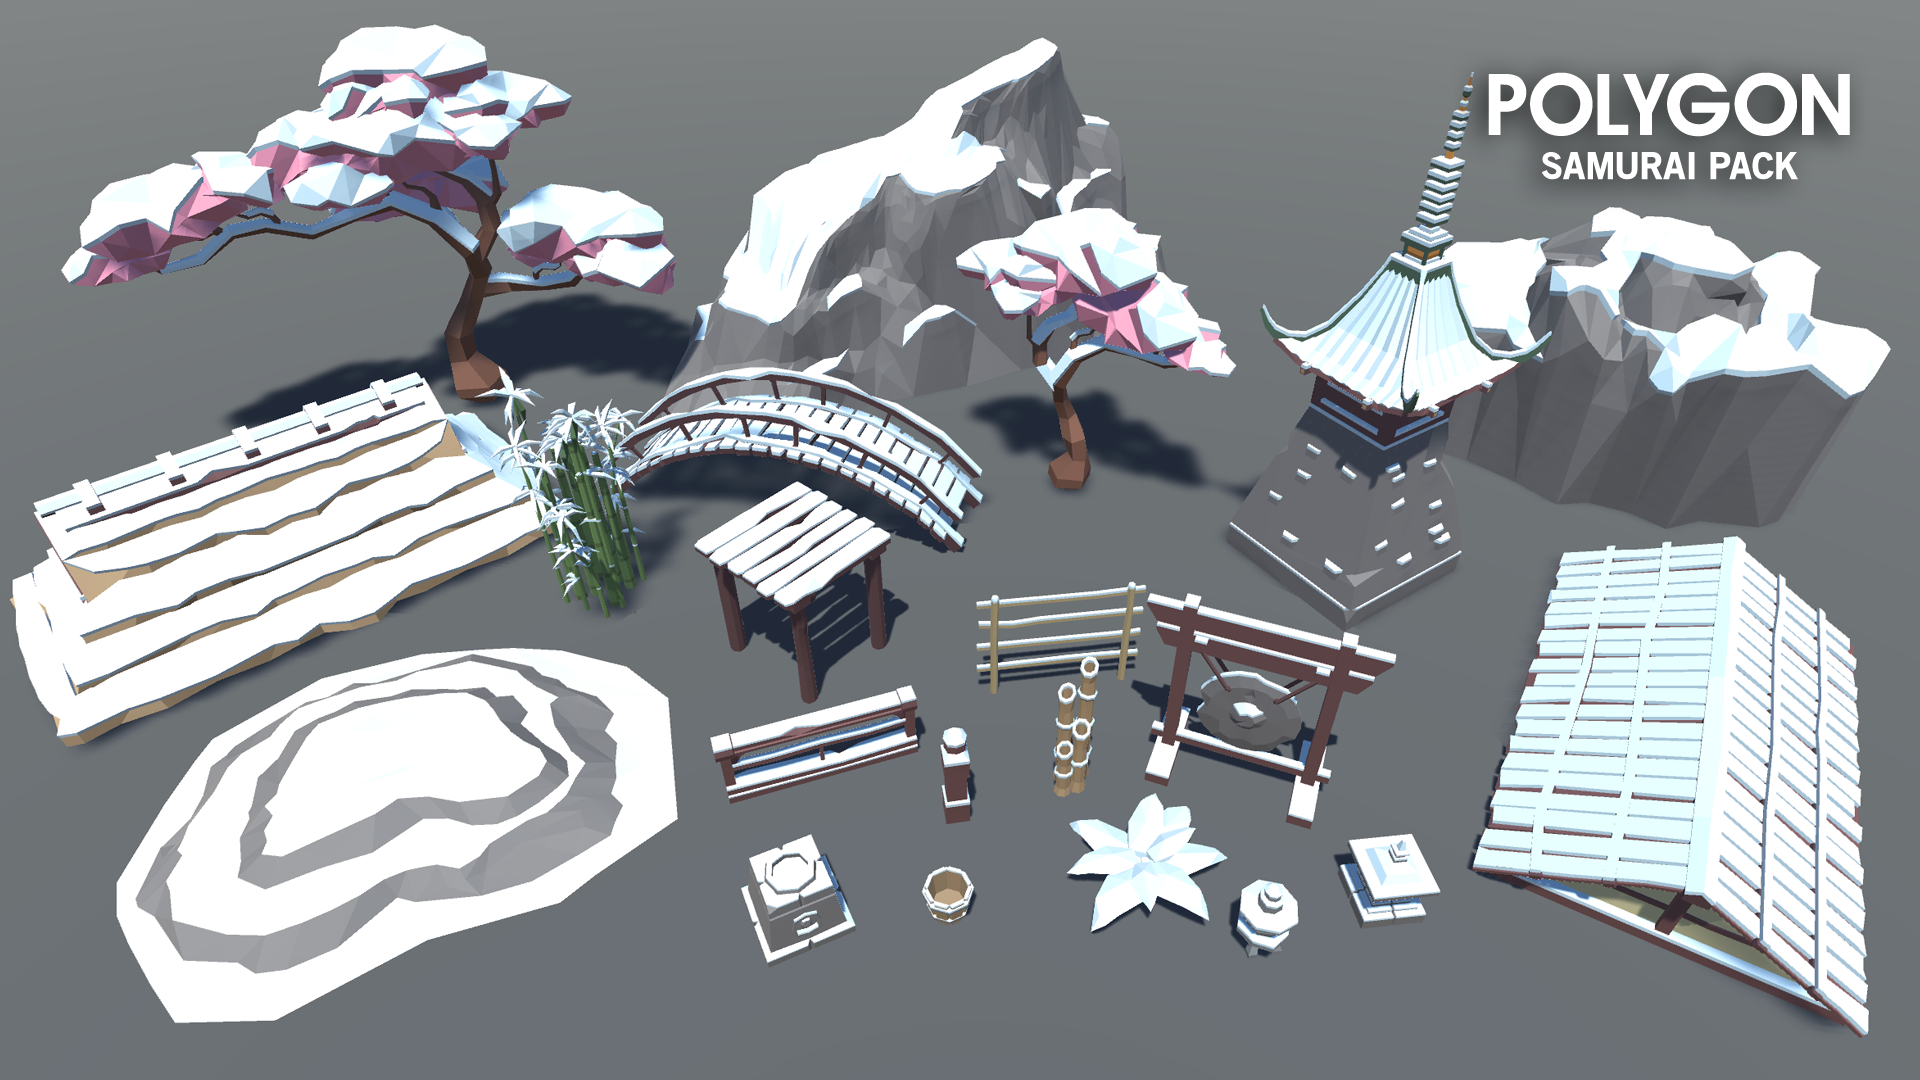 Snow covered environments for Samurai and Feudal Japan low poly games